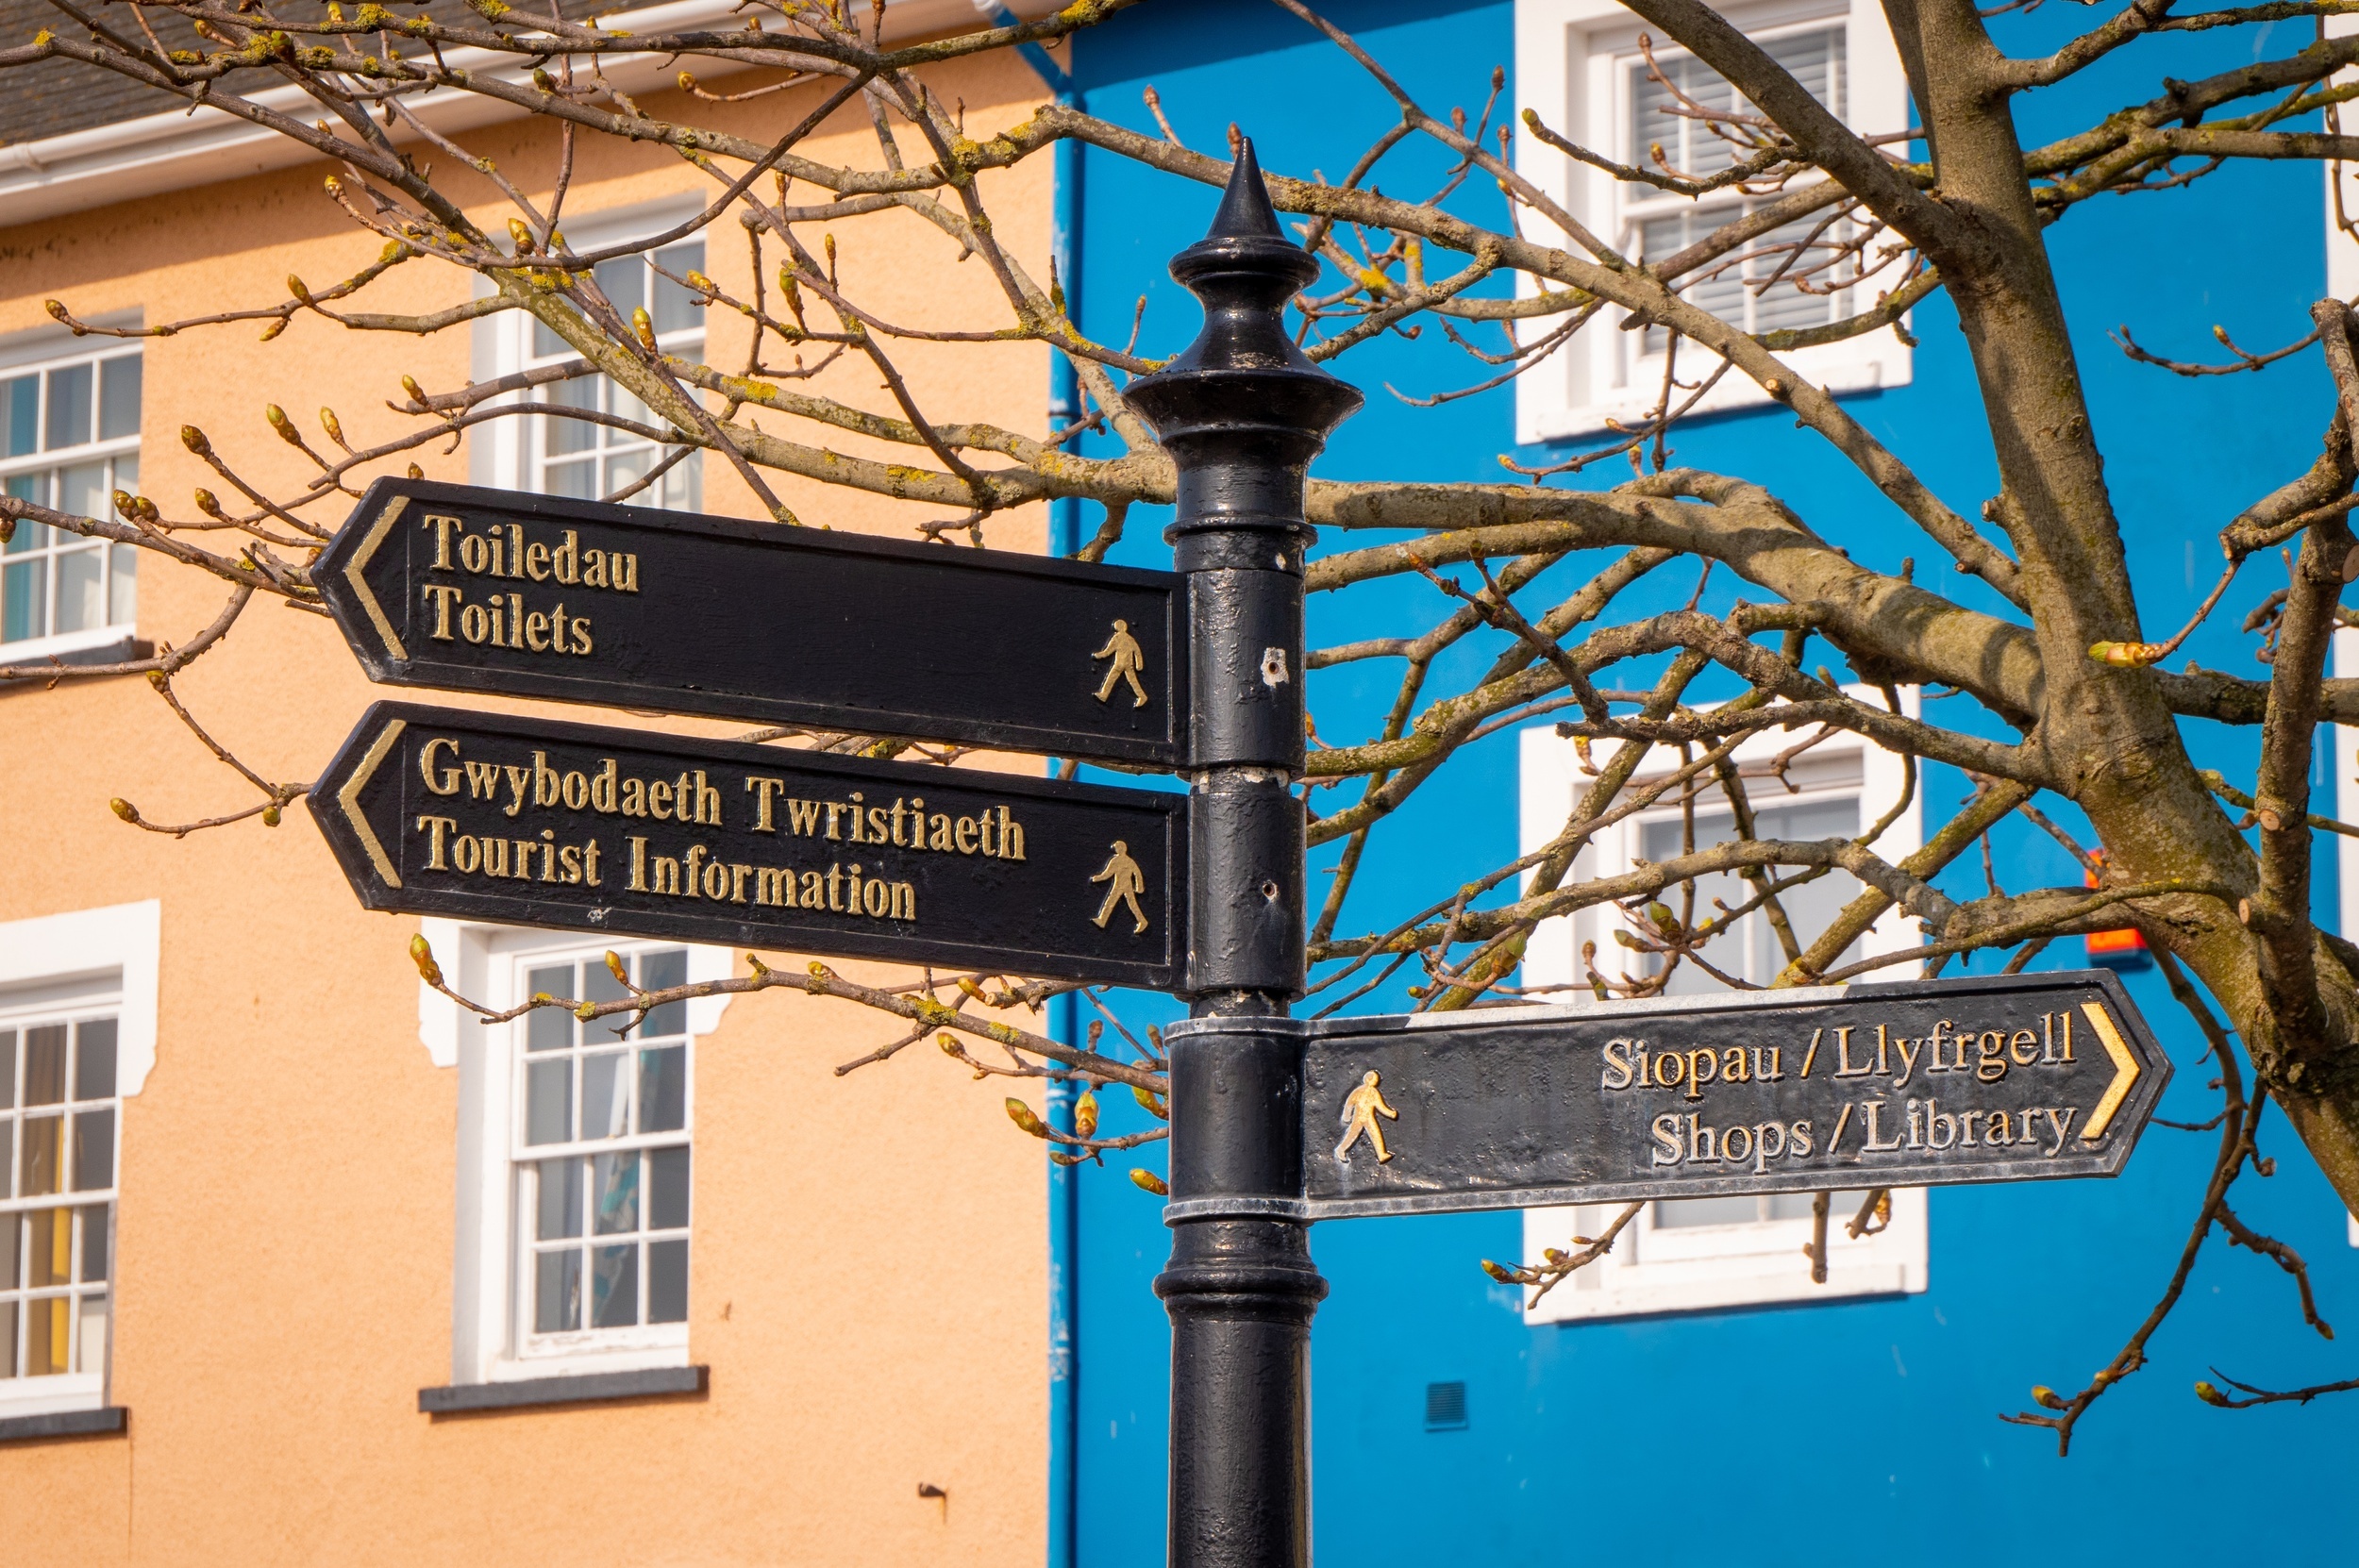 <p>Welsh, one of the languages spoken in Wales, has a lot in common with English. Certain aspects of it will be challenging to pick up on, like pronunciation, but spelling and vocabulary should come easily. </p><p>You may also like: <a href='https://www.yardbarker.com/lifestyle/articles/20_us_unique_museums_you_wont_believe_are_real/s1__40261792'>20 U.S. unique museums you won’t believe are real</a></p>